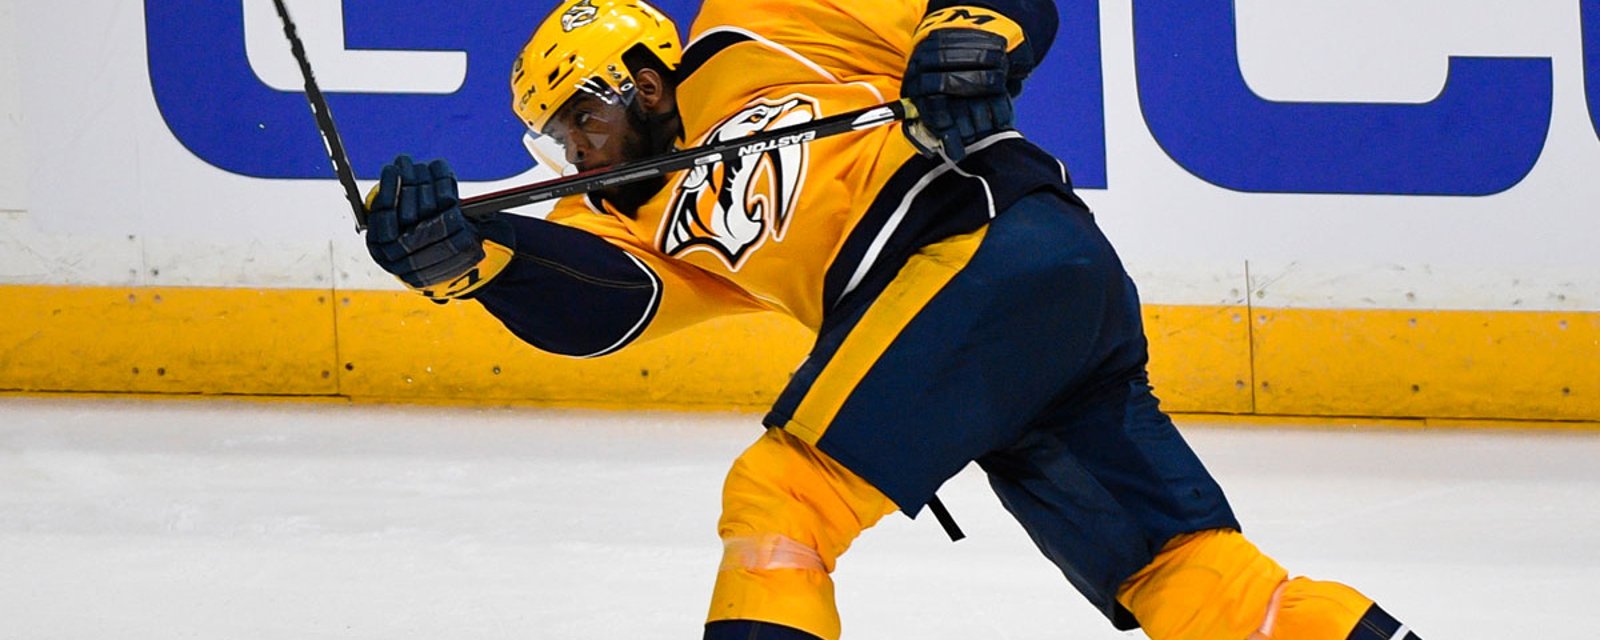 Report: Subban shares his stance on Donald Trump's controversial comments 